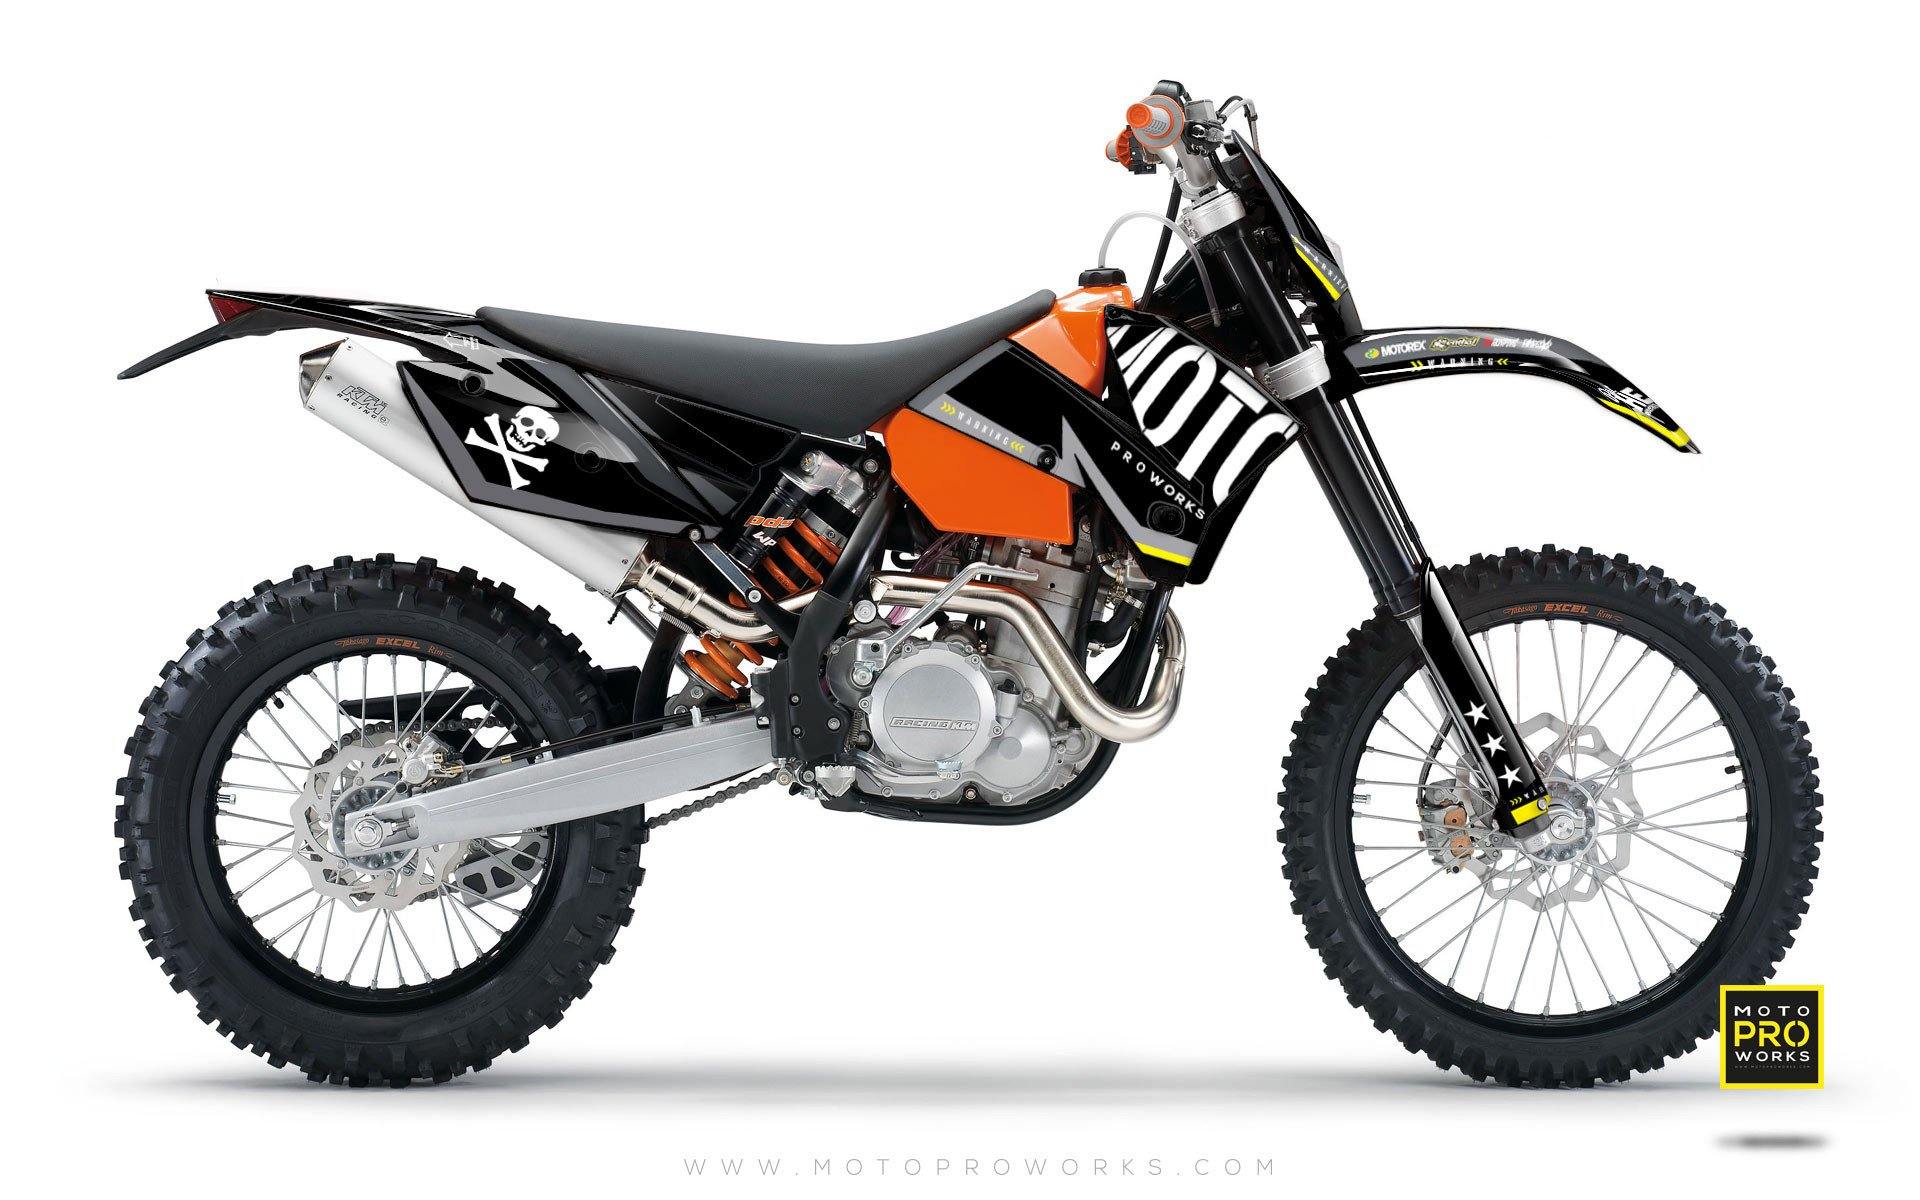 KTM GRAPHIC KIT - "GTECH" (black) - MotoProWorks | Decals and Bike Graphic kit